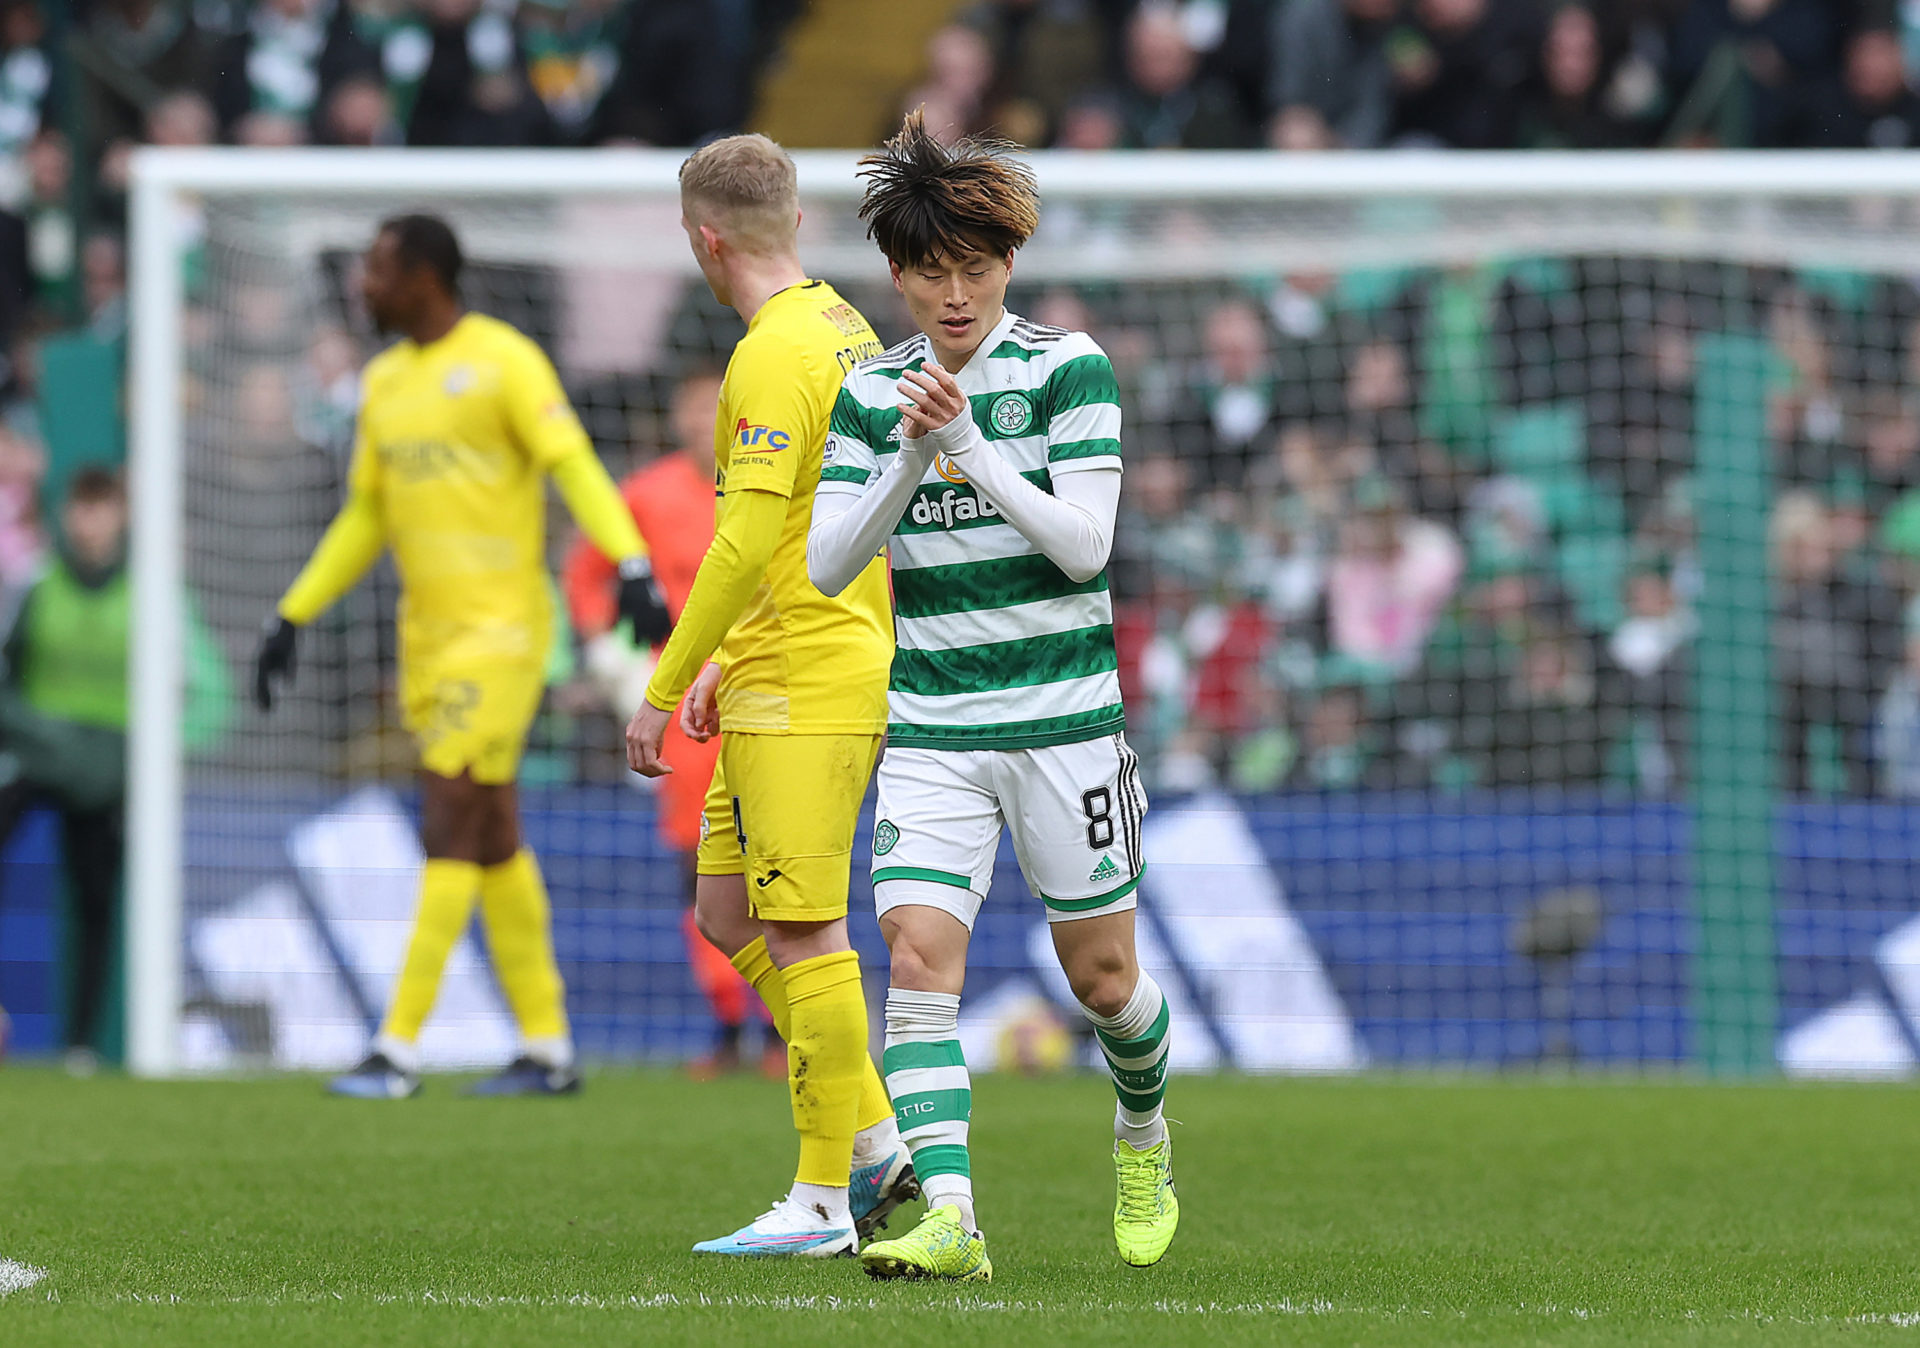 Oh joins Kyogo Furuhashi as Celtic's forwards